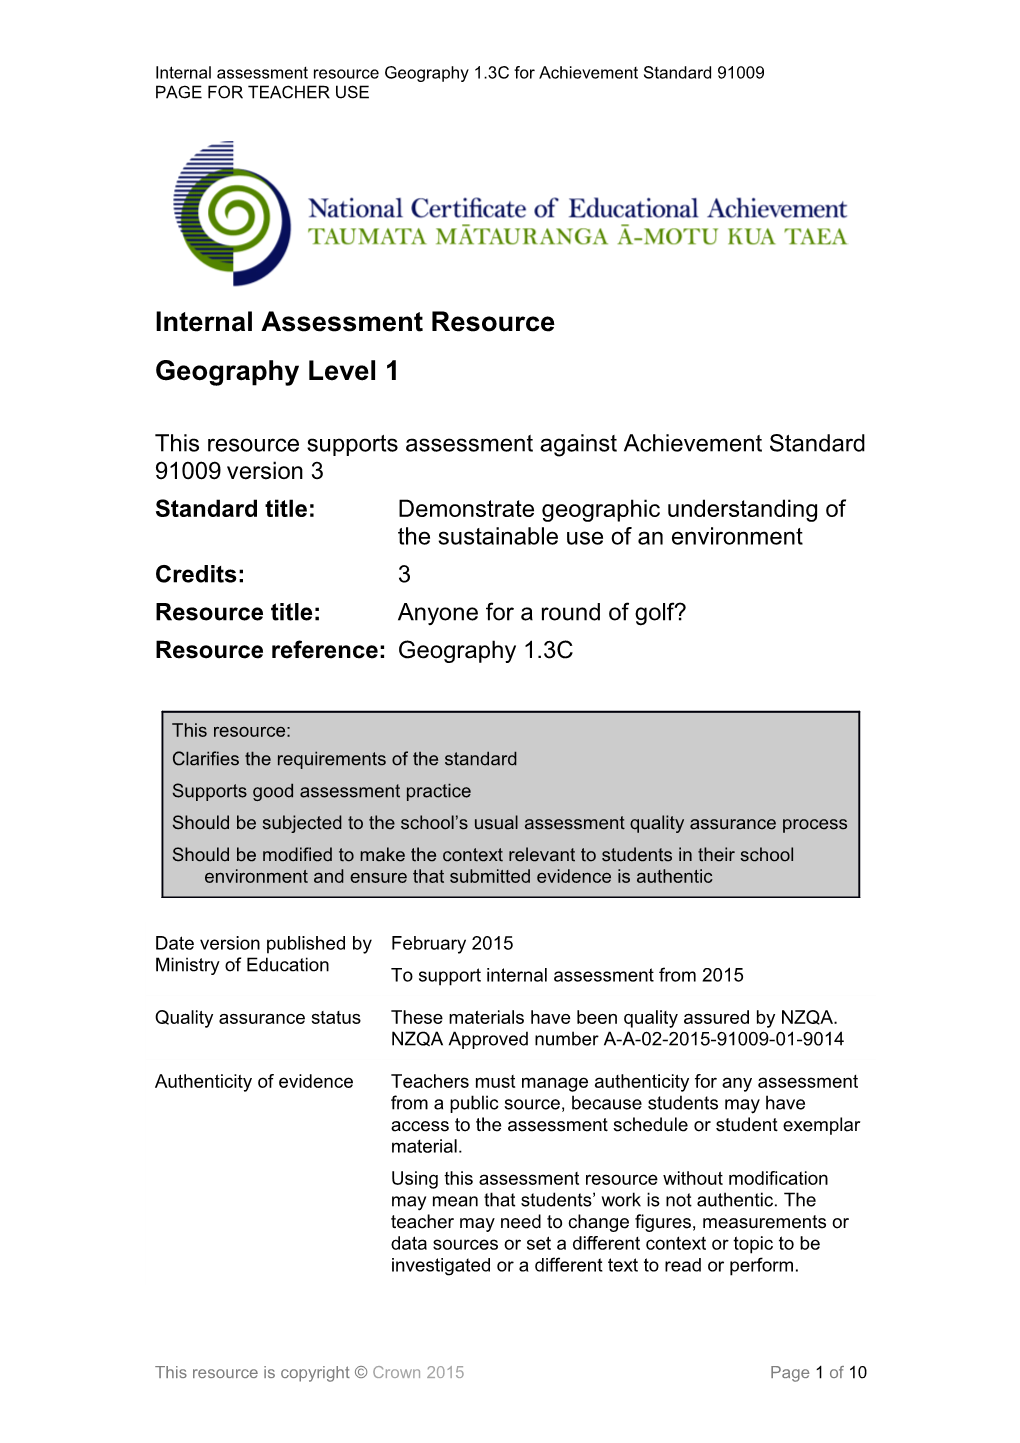 Internal Assessment Resource Geography Level 1